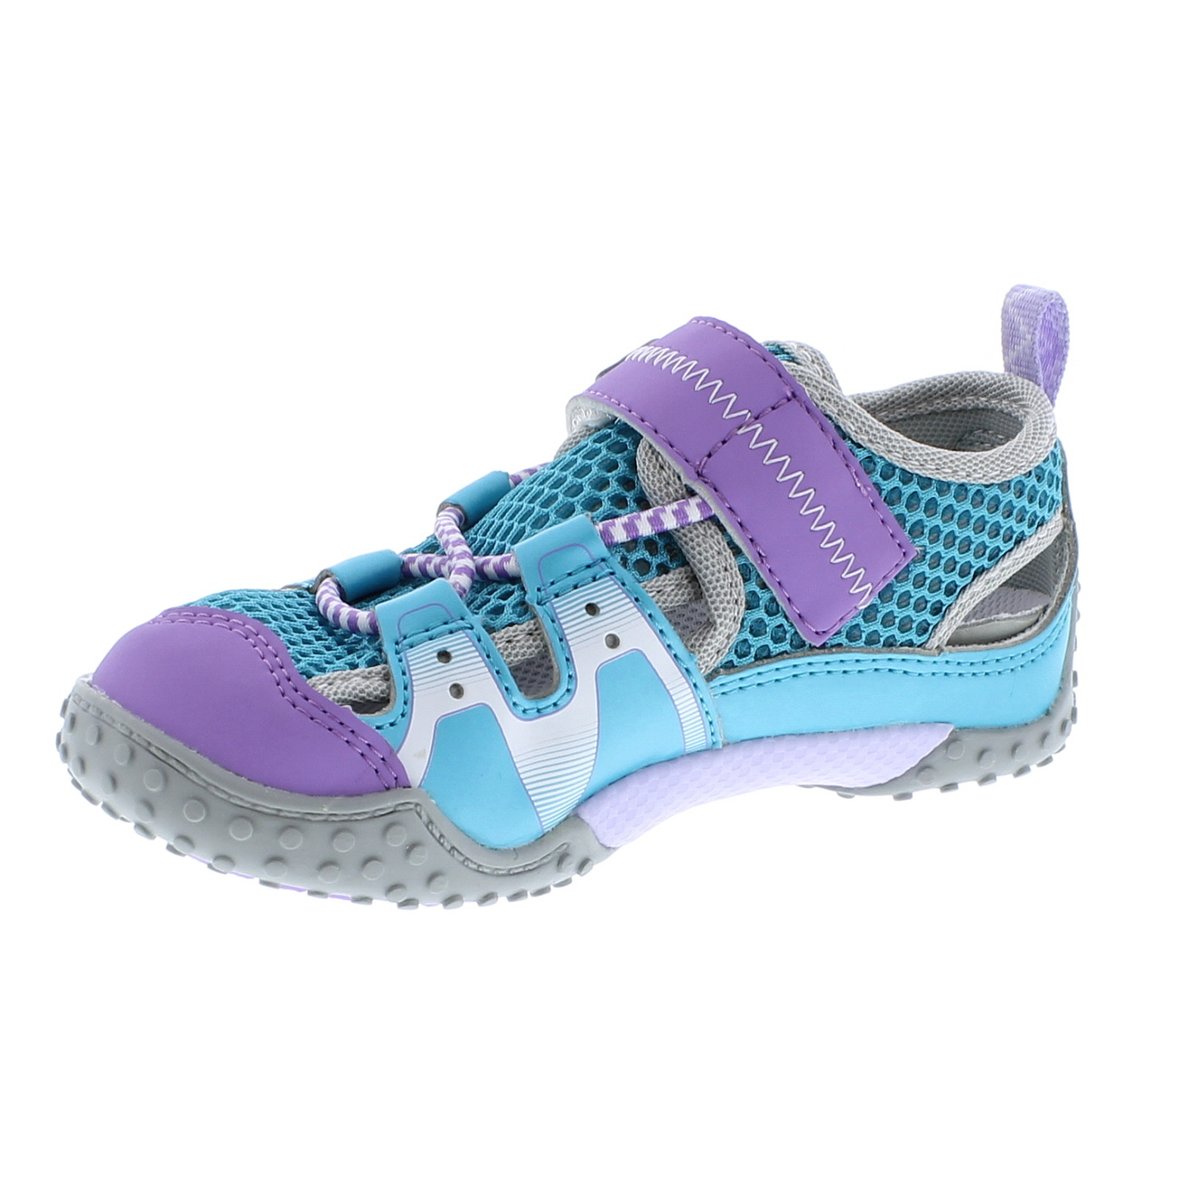 Child Tsukihoshi Ibiza2 Sneaker in Turquoise/Lavender from the front view